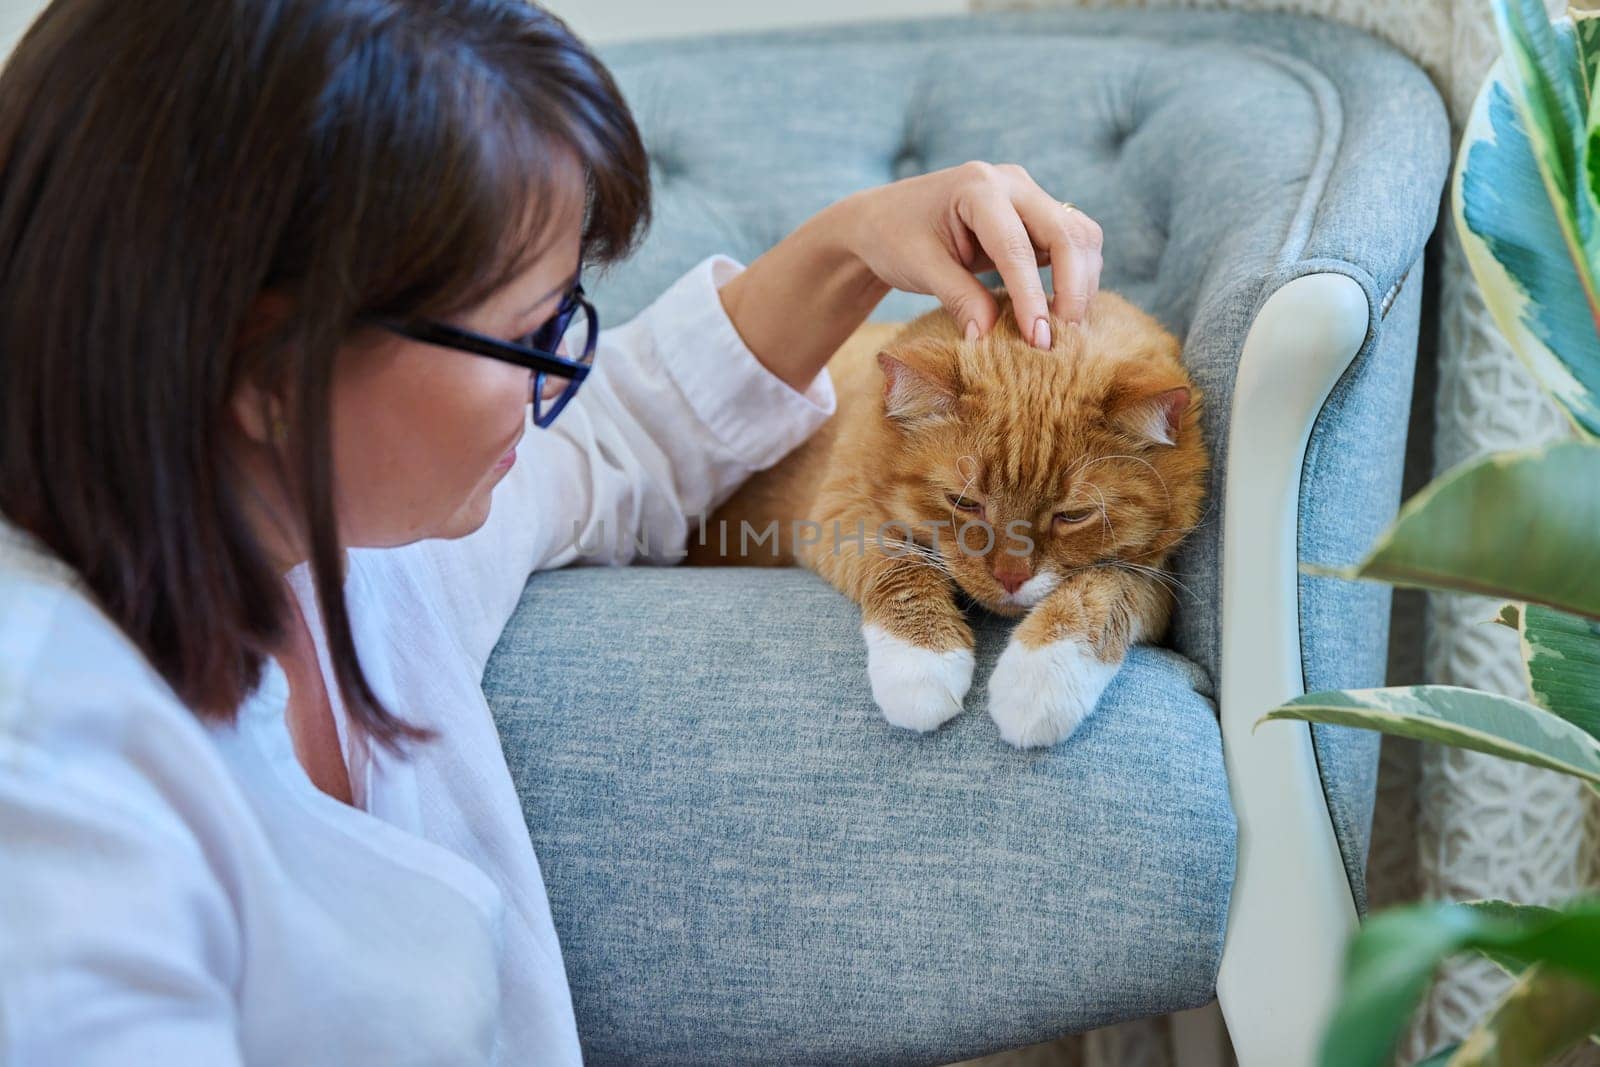 Middle aged woman talking touching ginger pet cat, home interior background. Friendship, love, care, leisure, lifestyle, animals people house concept